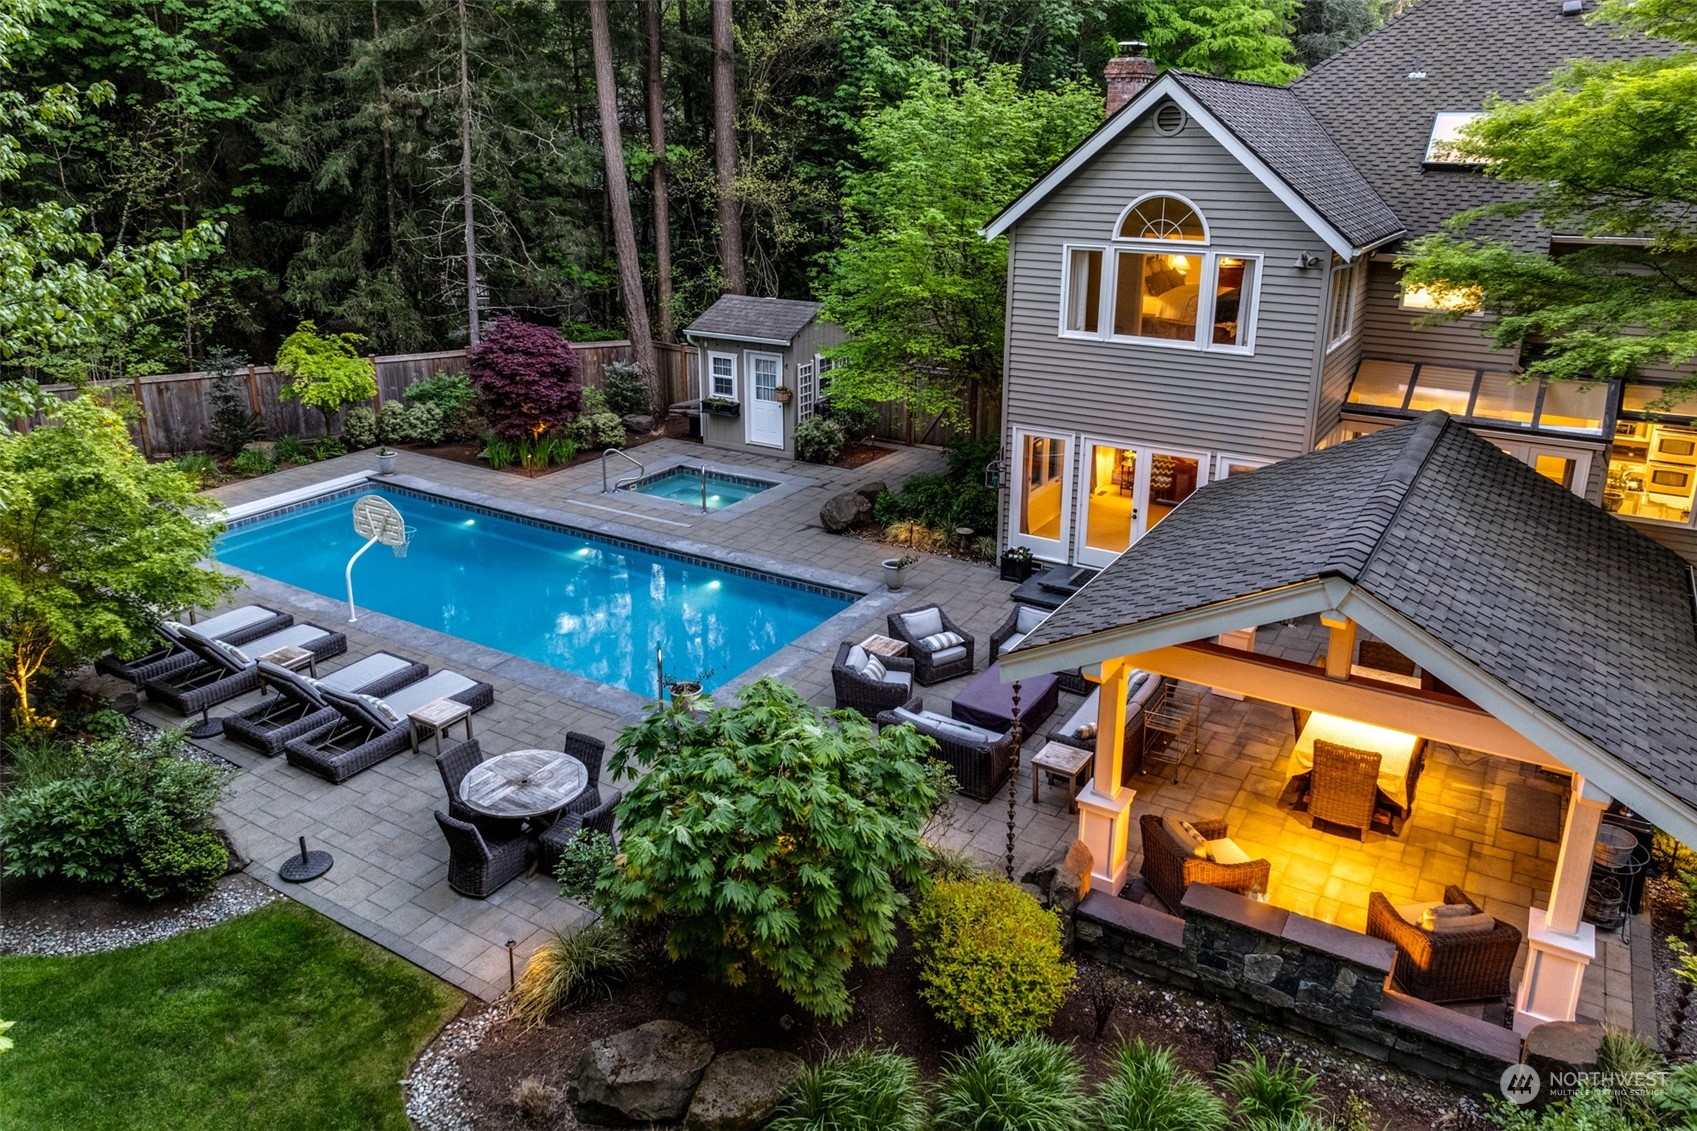 an aerial view of a house with swimming pool and outdoor seating